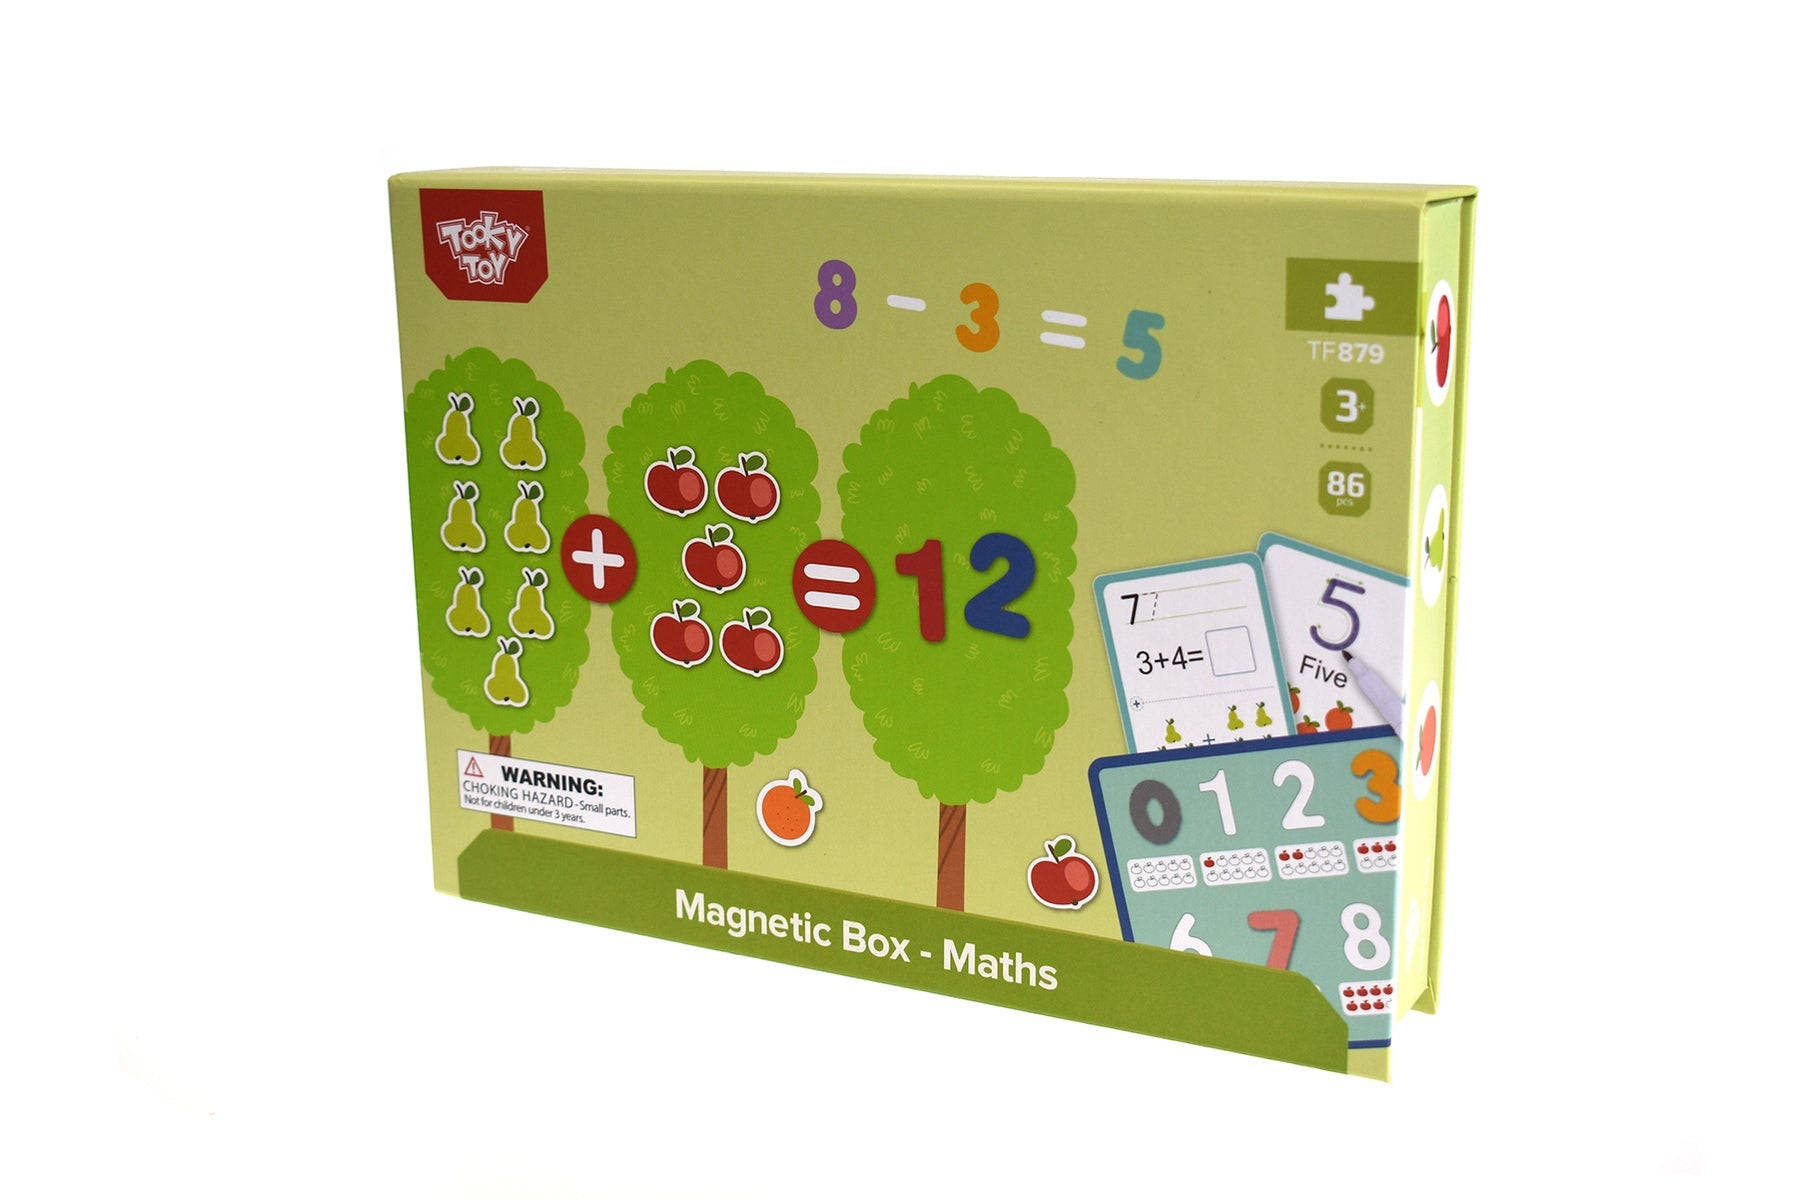 Magnetic Box - Maths Puzzle Game